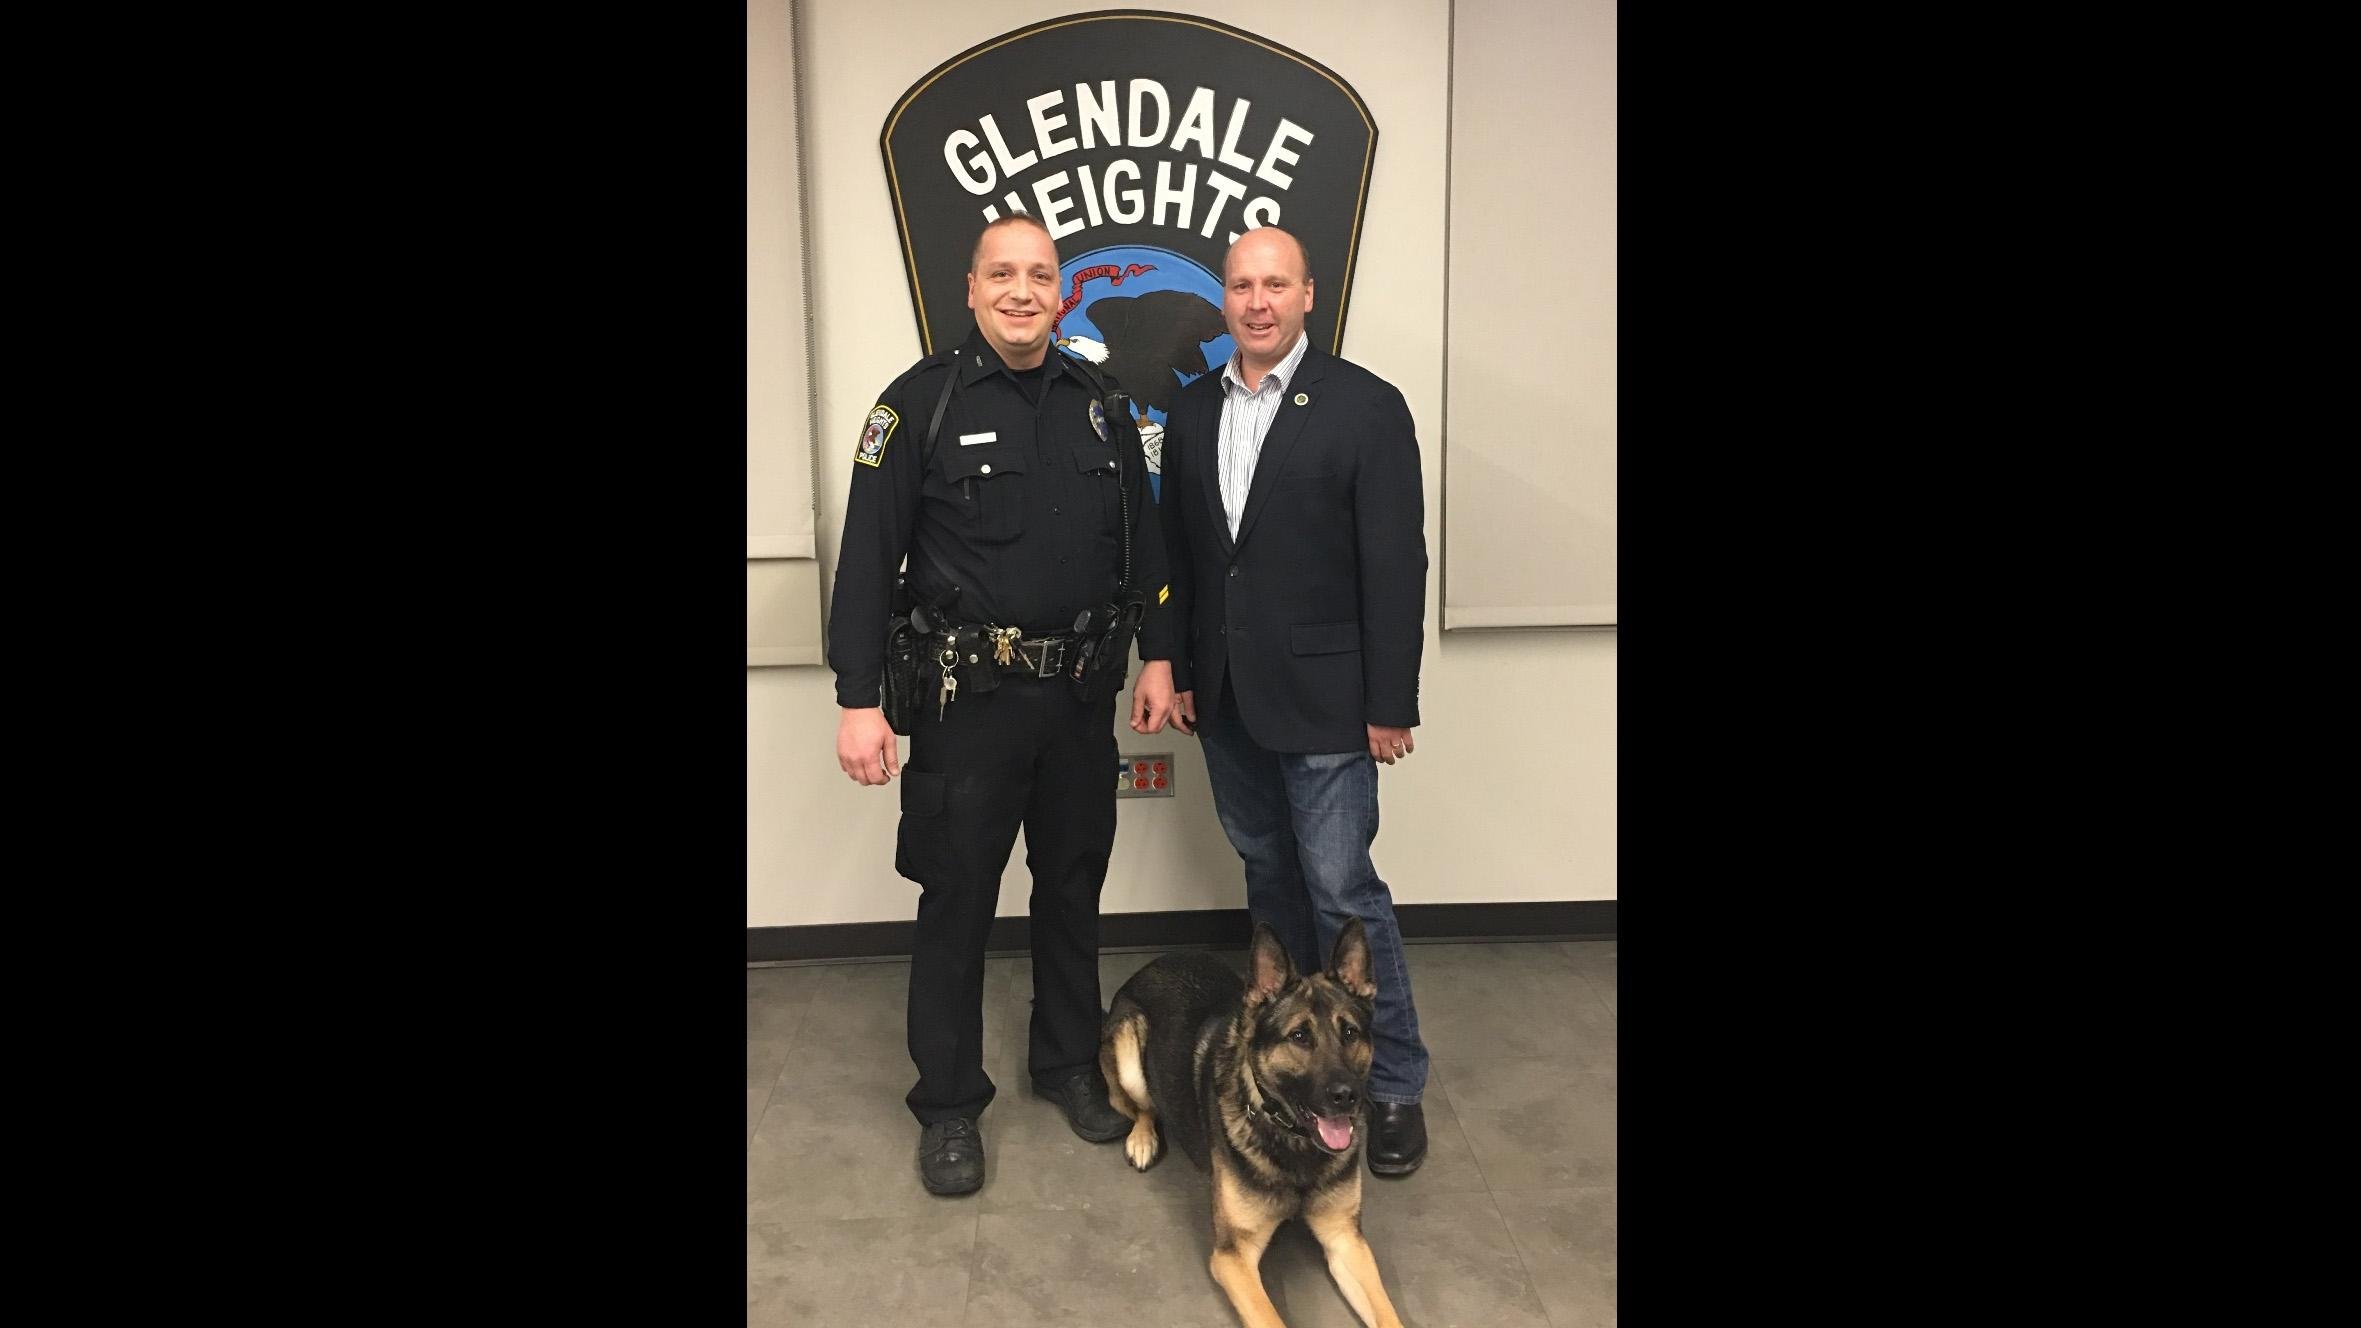 State Sen. Tom Cullerton, right, poses with Glendale Heights Police Officer Mike Huff and K9 Officer Orkan. (State Sen. Tom Cullerton)